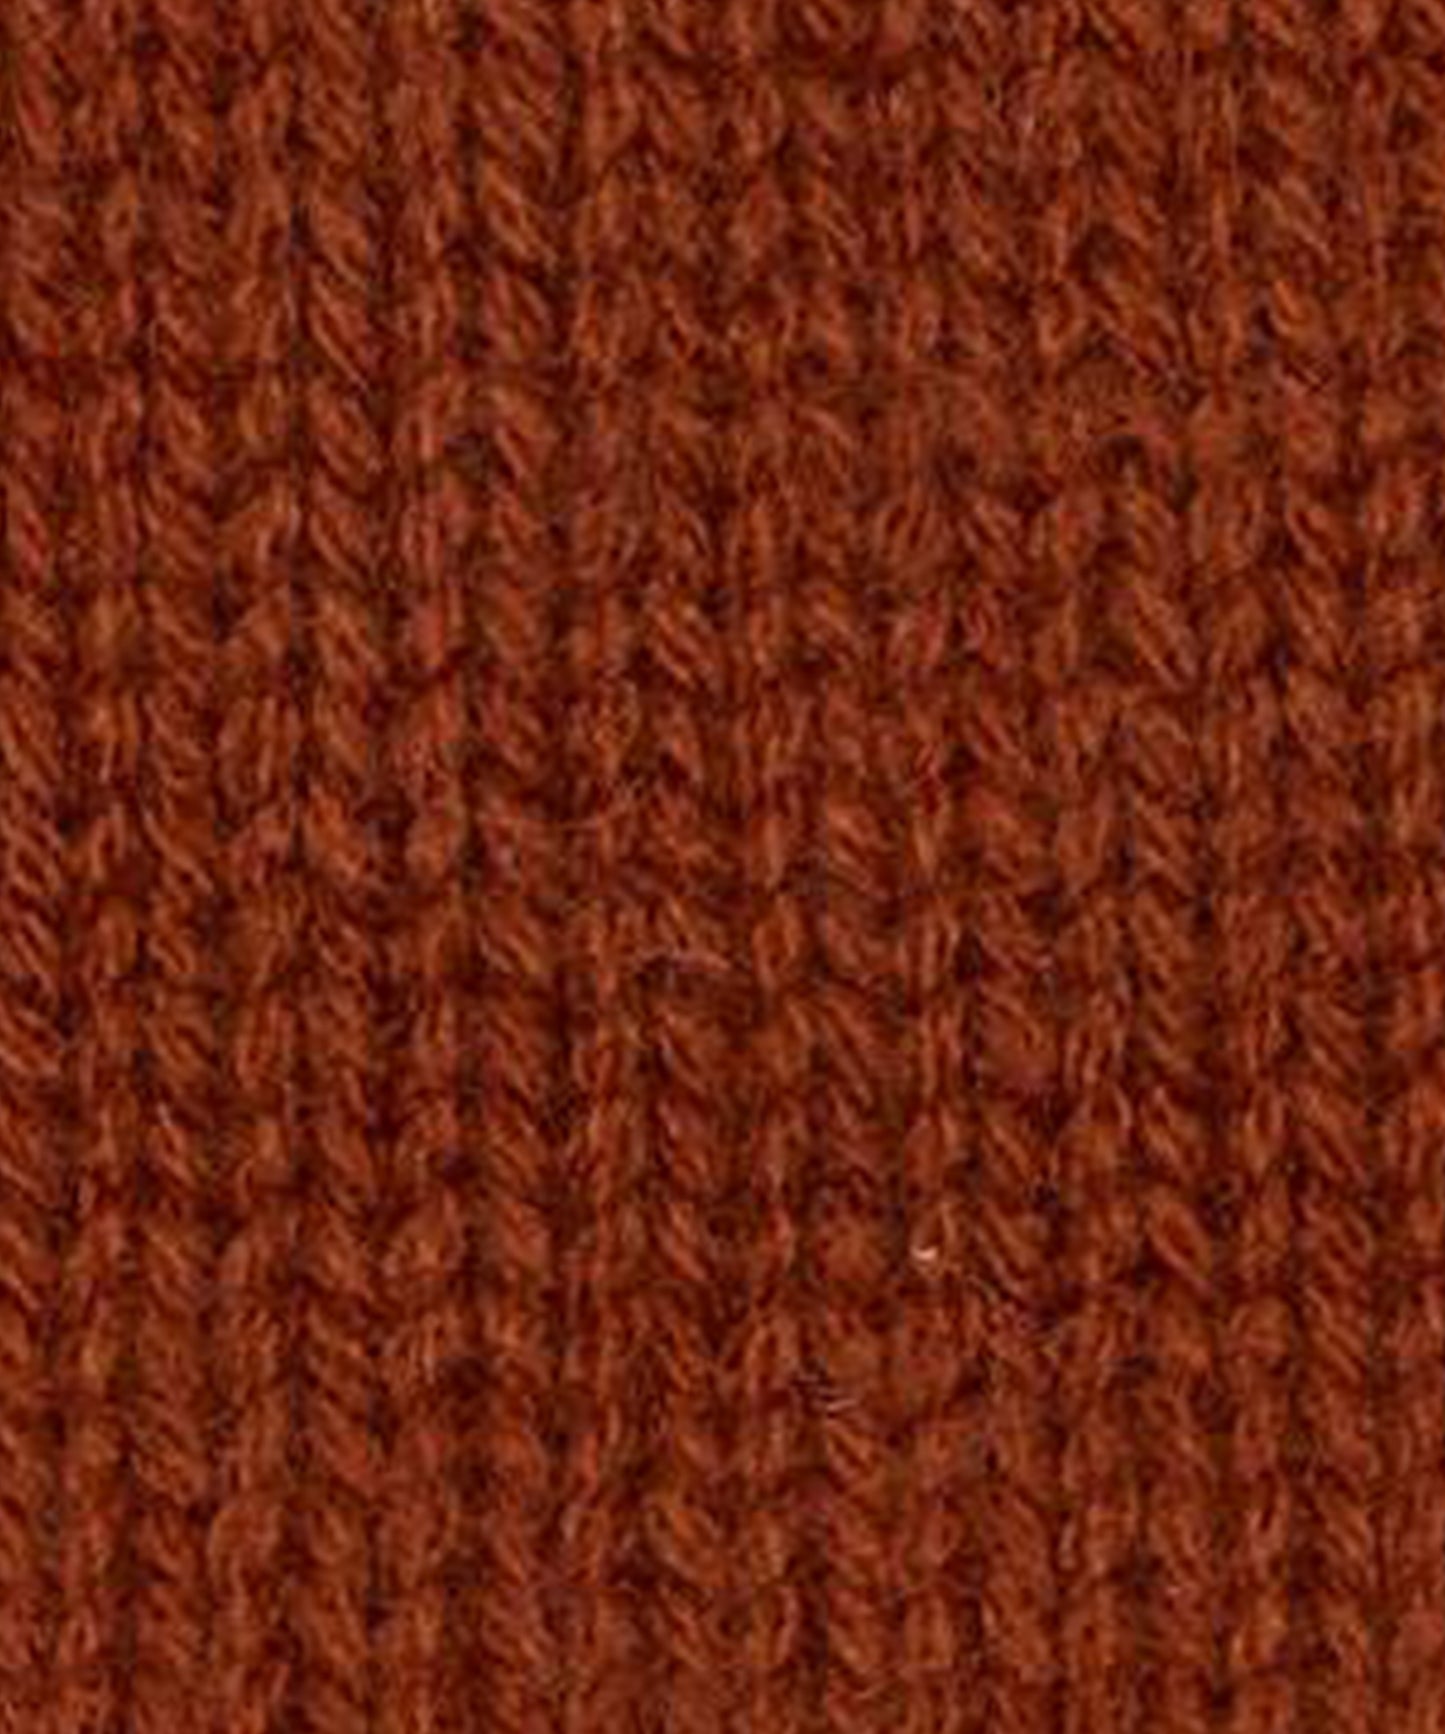 Wool/Cashmere Lofty Beanie in color Cinnamon